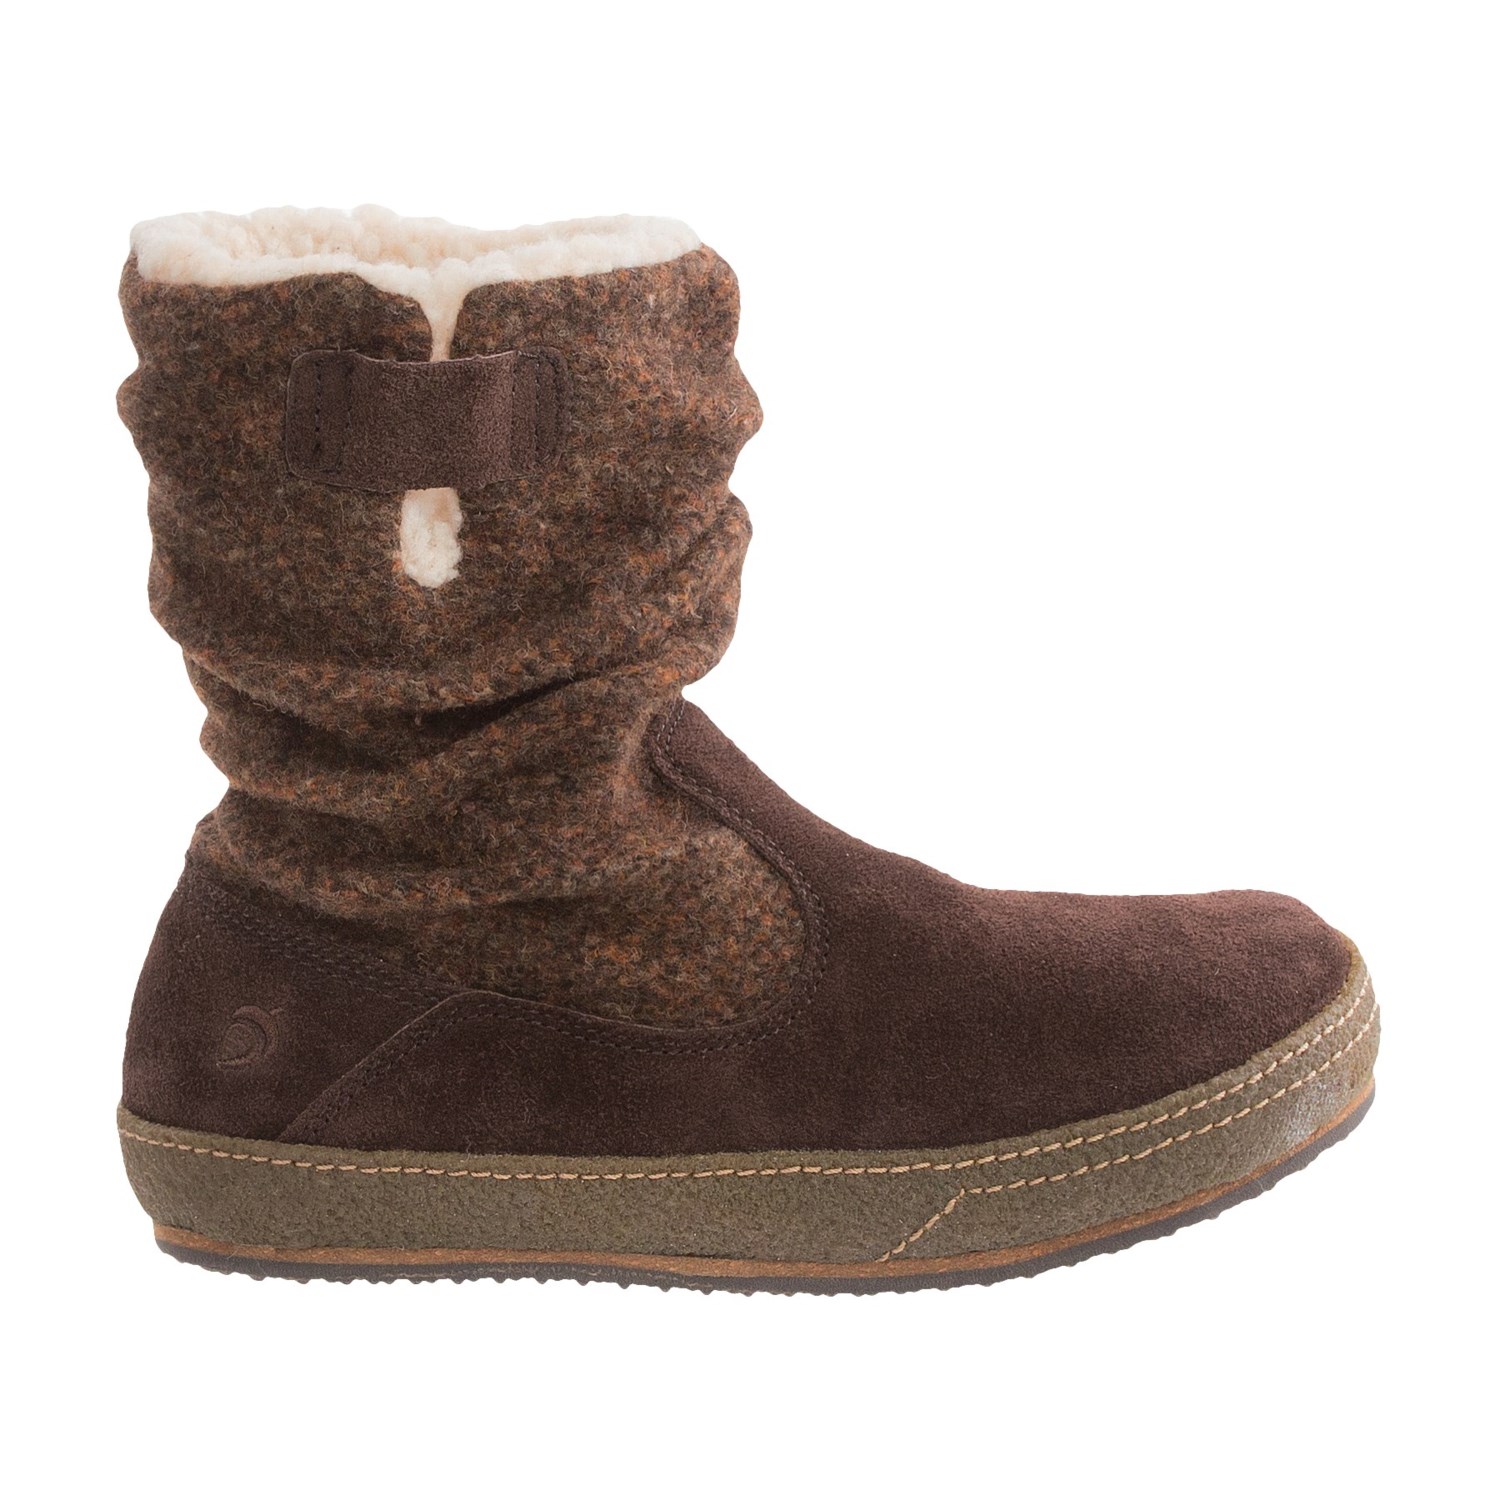 Acorn Transit Boot Slippers (For Women) - Save 92%